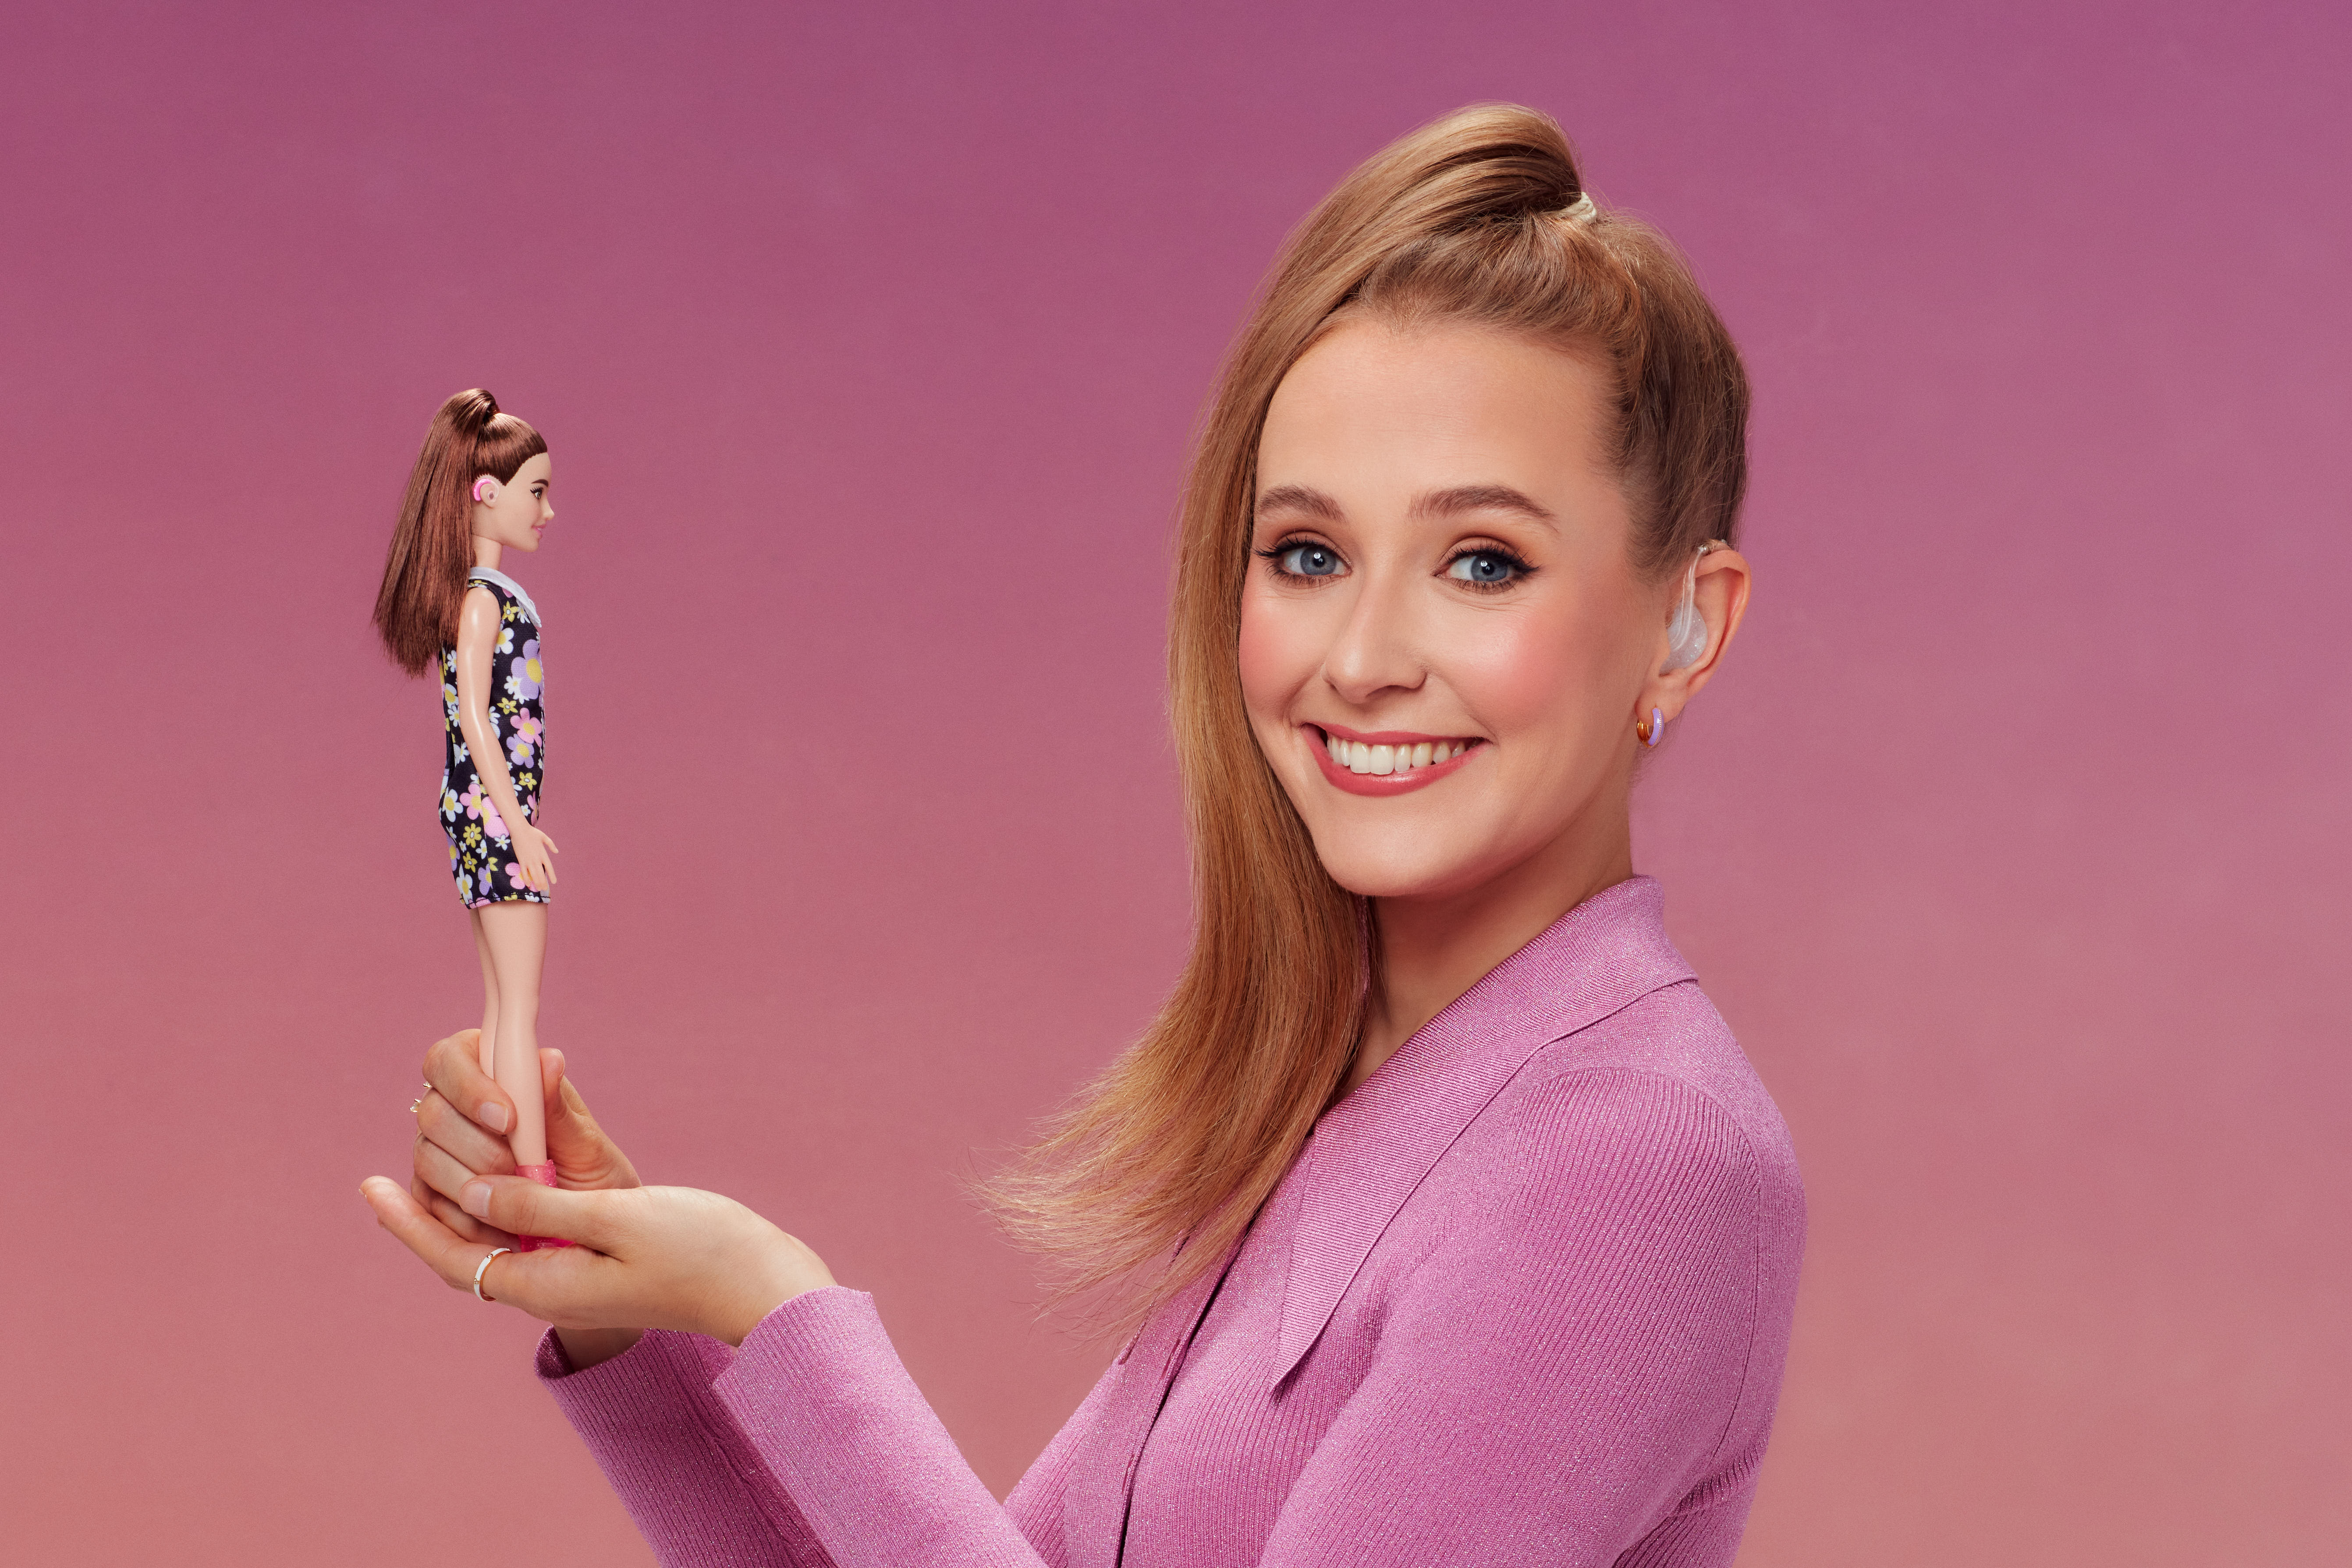 Barbie and Ken reflect body diversity with hearing aids, colourful  prosthetic limbs, wheelchairs and skin conditions